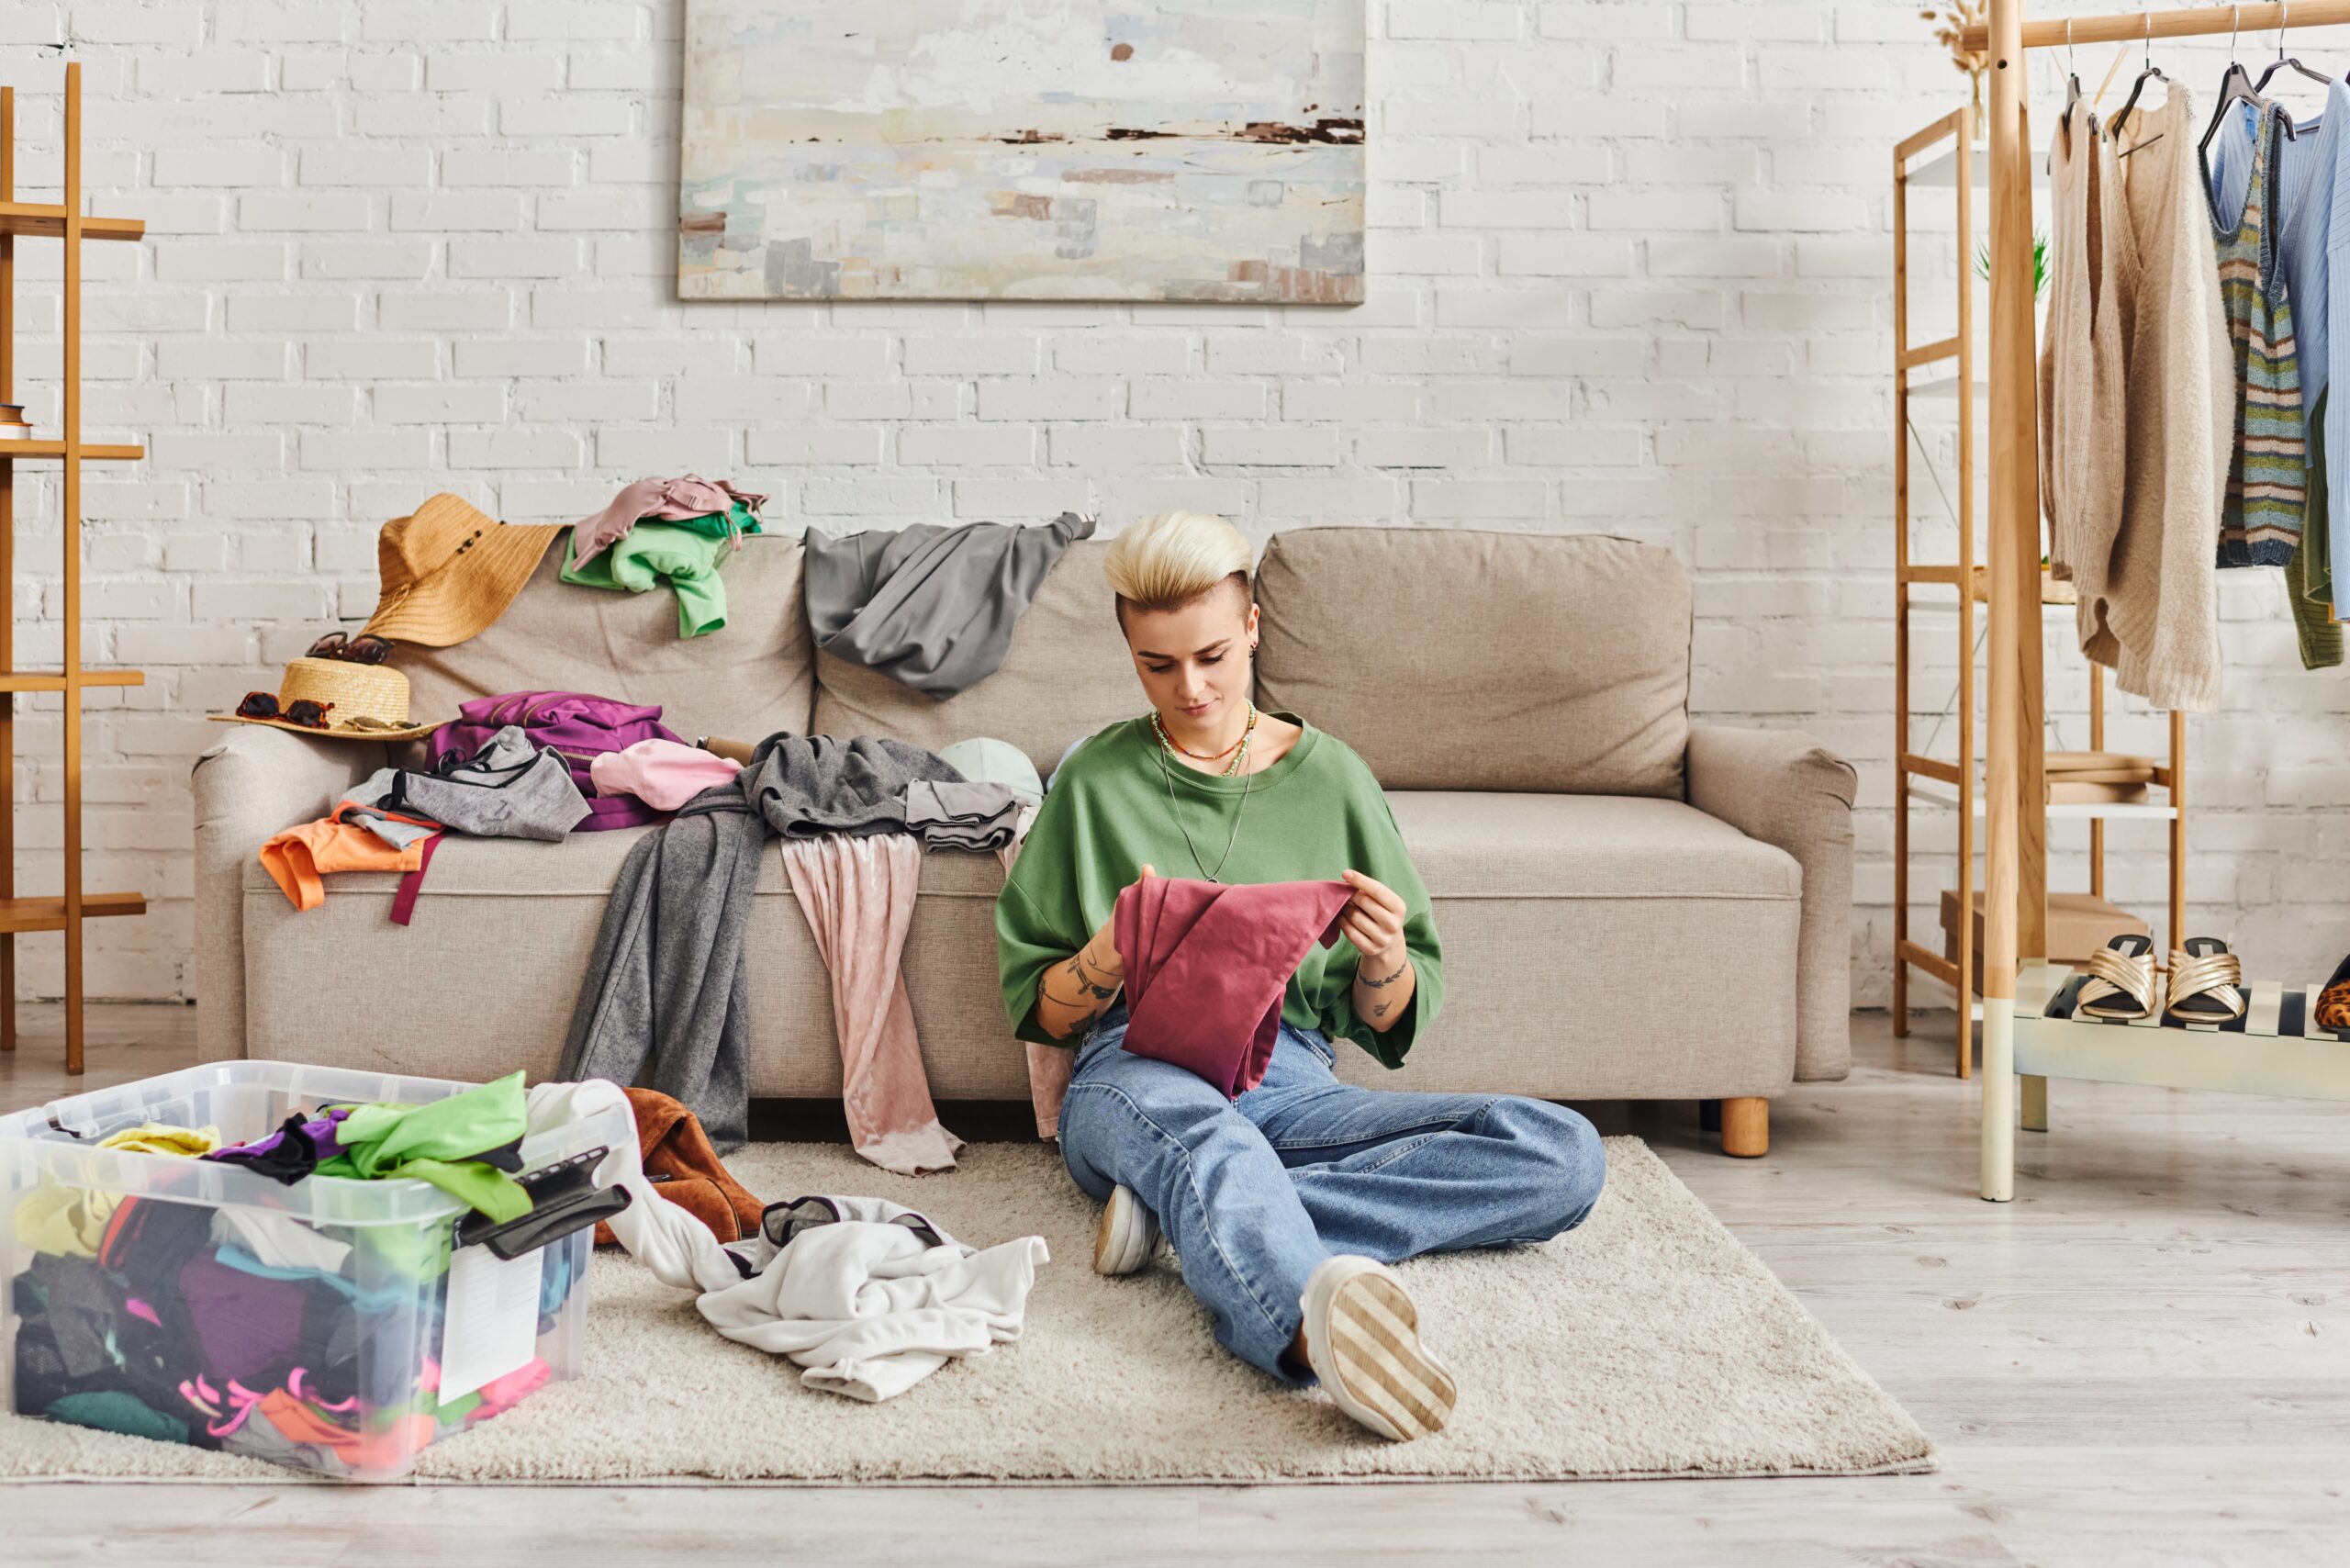 woman sorting through her clothes in the living room